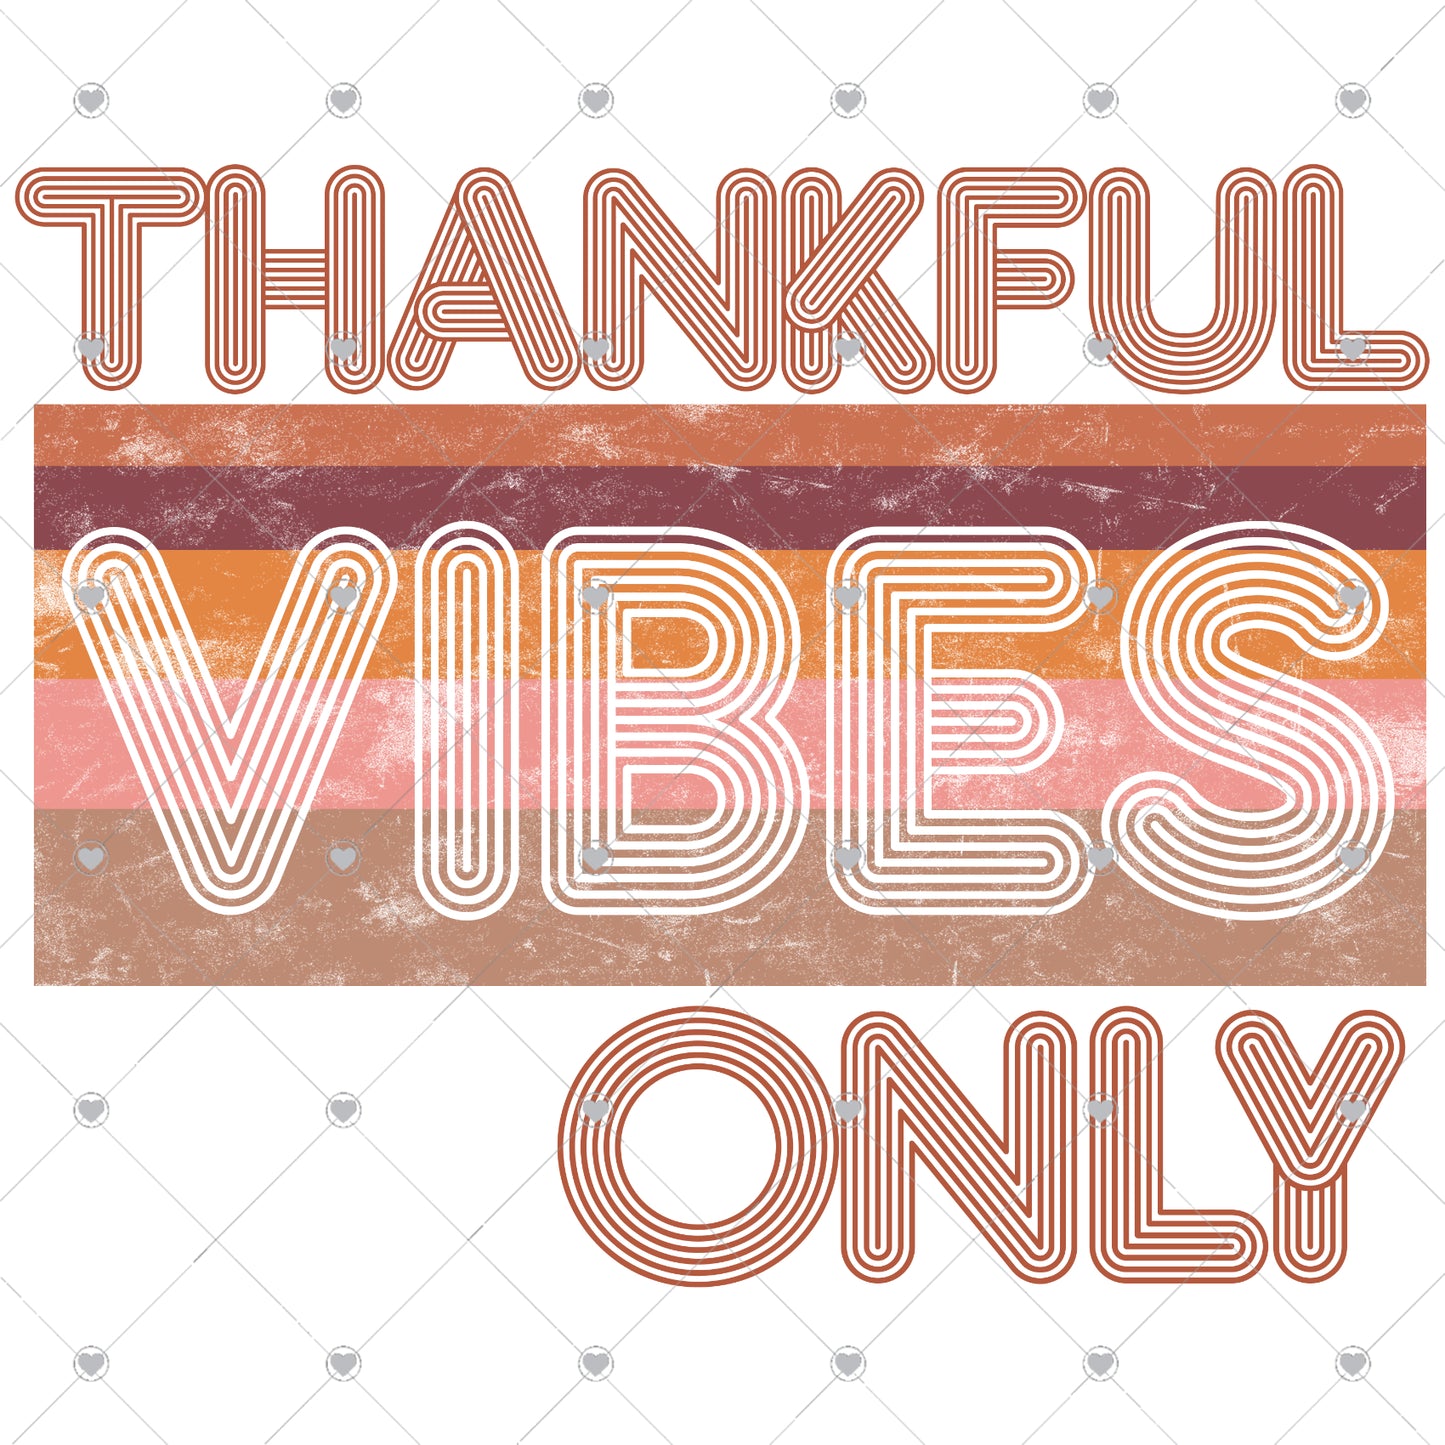 Thankful Vibes Only | Retro Ready To Press Sublimation and DTF Transfer